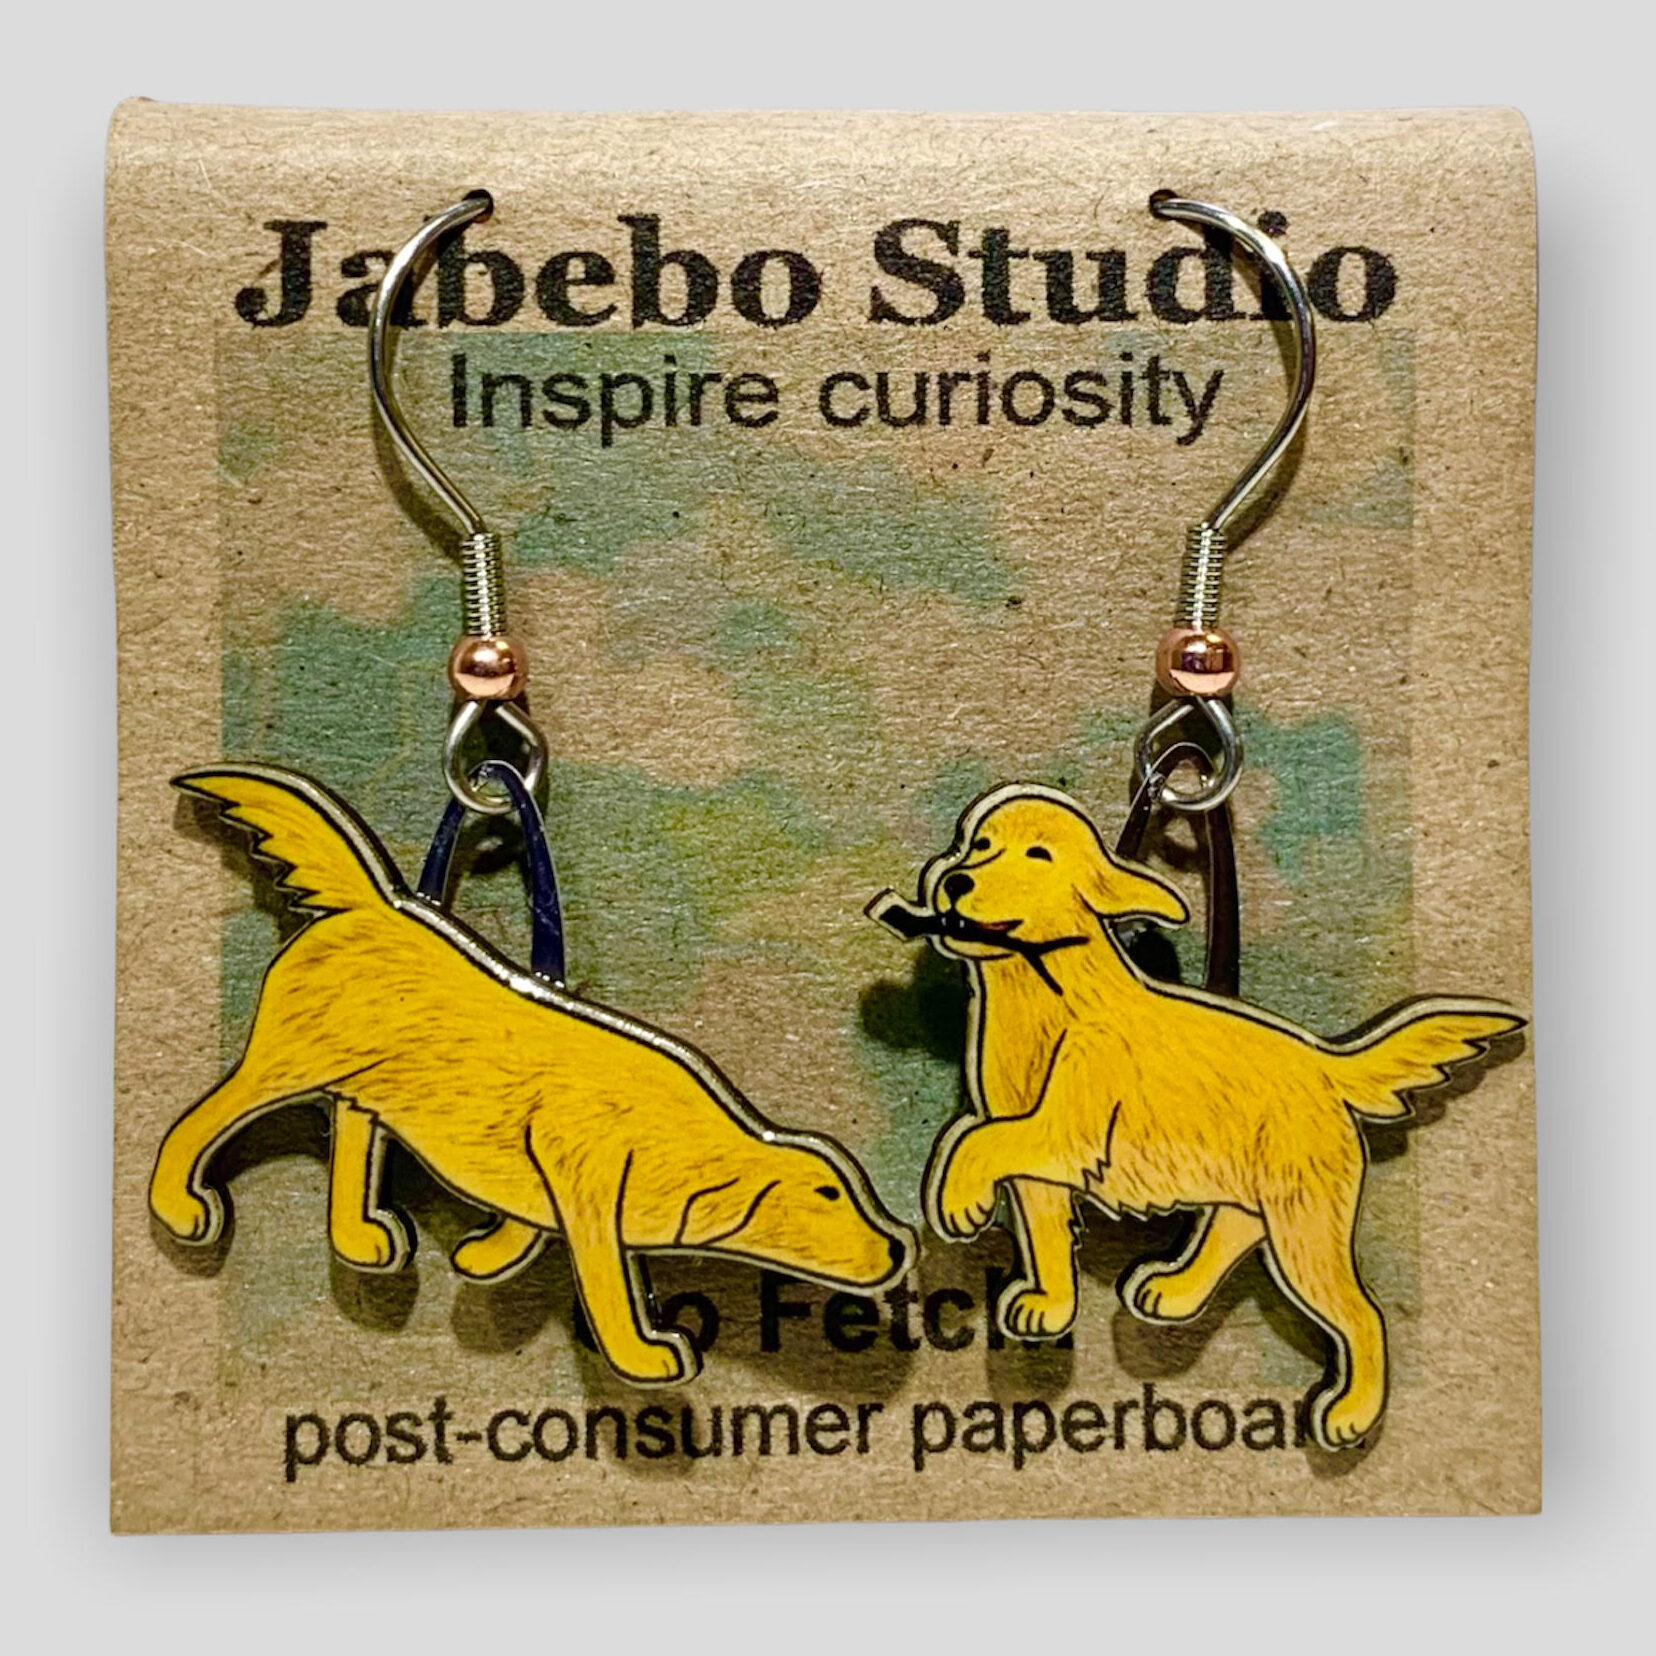 Picture shown is of 1 inch tall pair of earrings of the pet the Retriever (Go Fetch!).